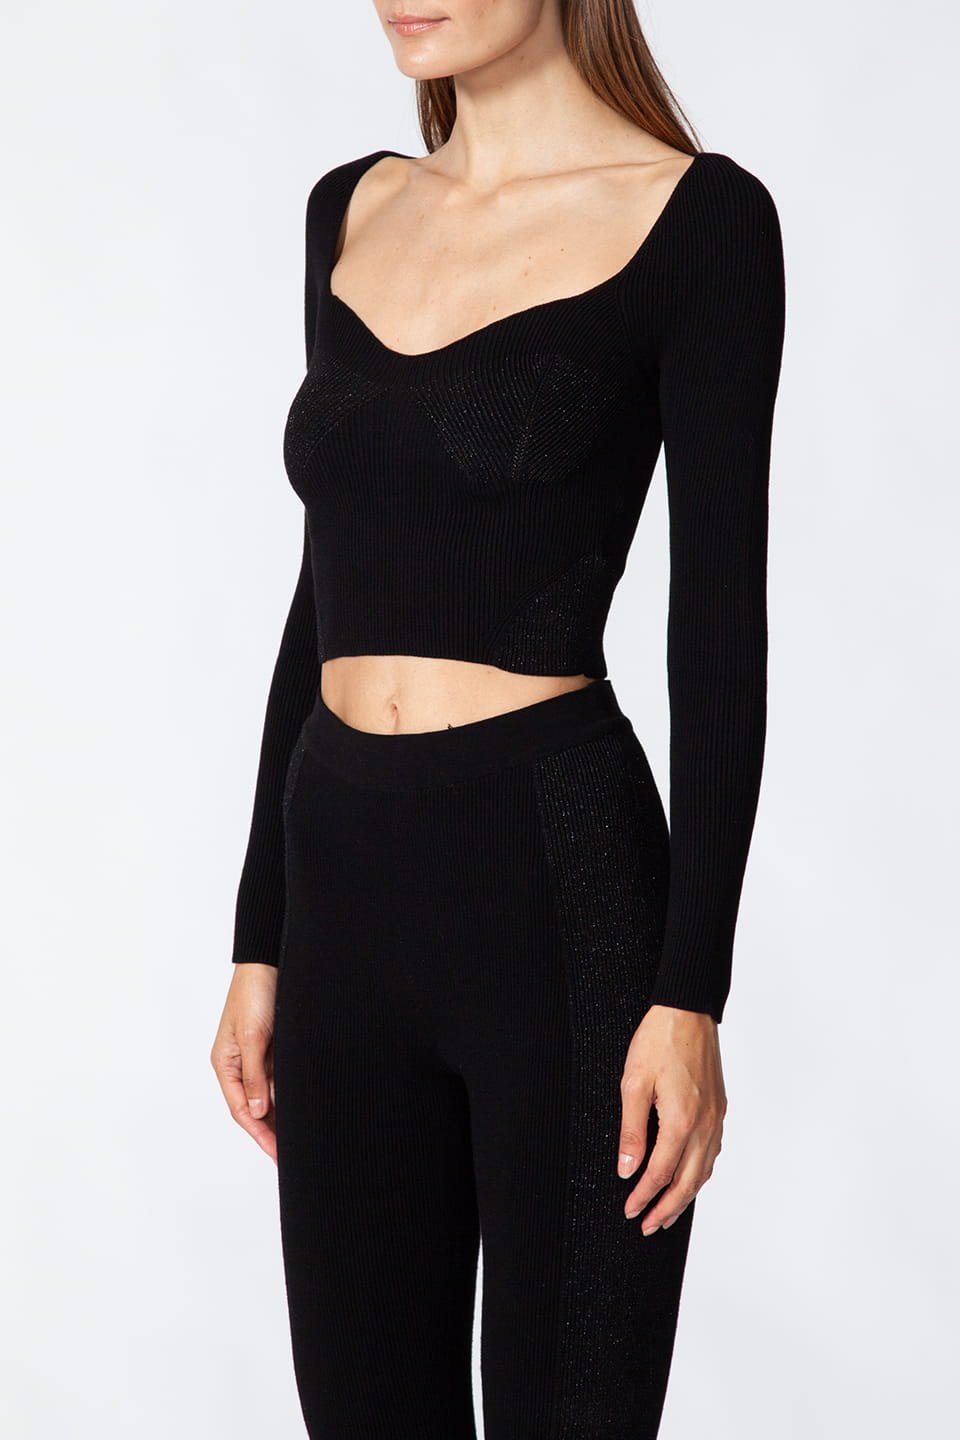 Model posing for side view, wearing stylist Kukhareva London's trendy black top, with cut out neckline and inserts threaded with metallic, shimmering yarn.